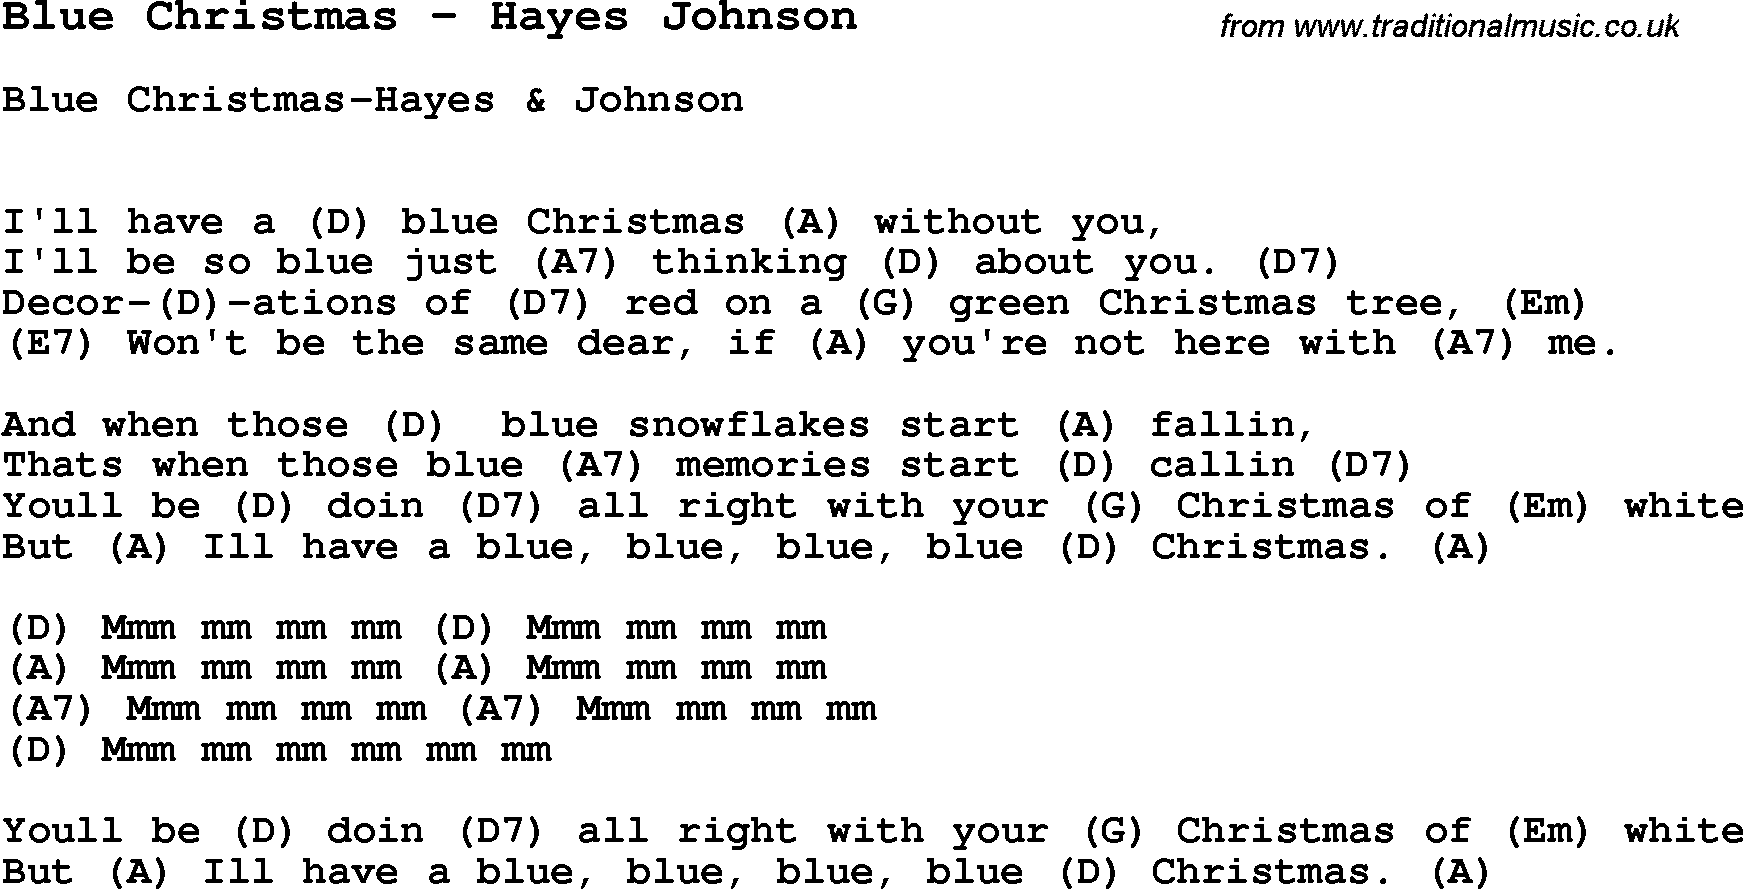 Song Blue Christmas by Hayes Johnson, with lyrics for vocal performance and accompaniment chords for Ukulele, Guitar Banjo etc.